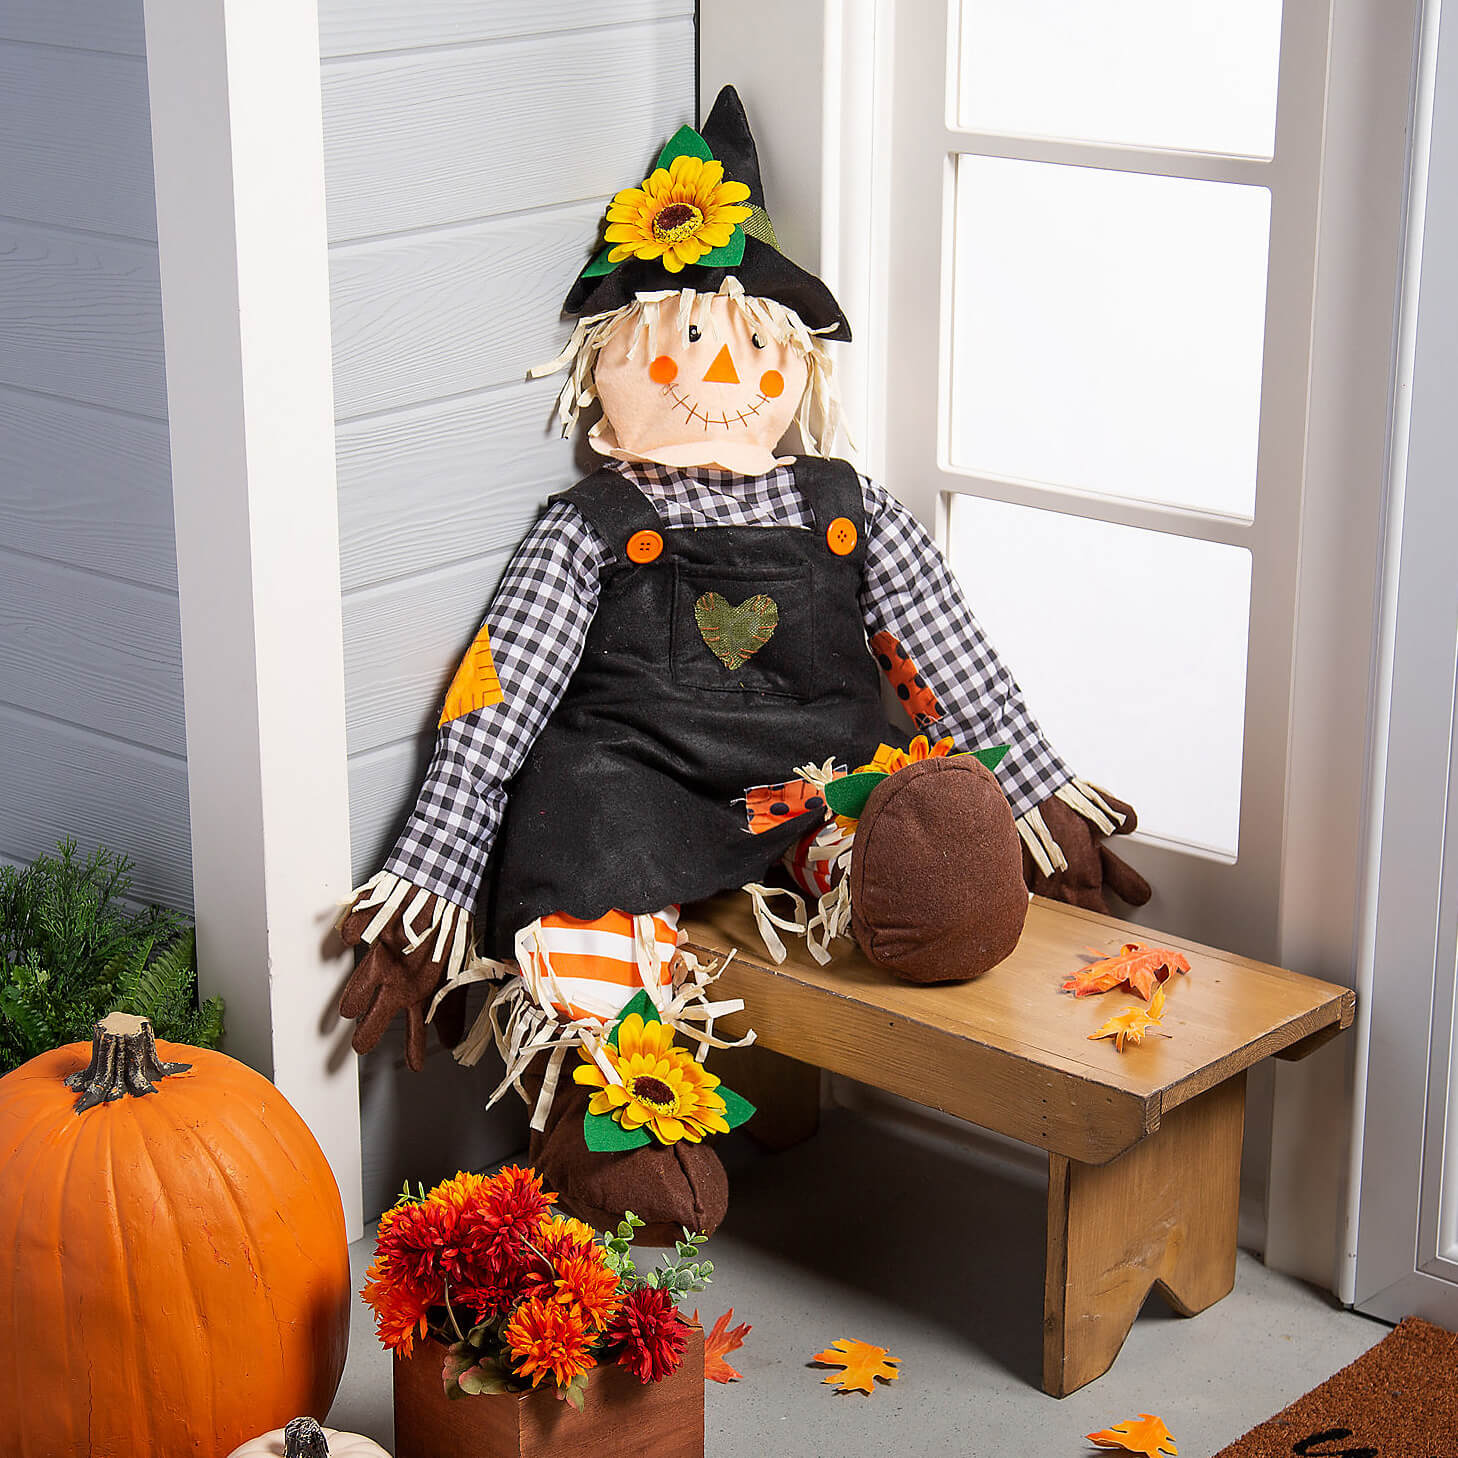 fall decorations pumpkins, scarecrows, sunflowers on bench